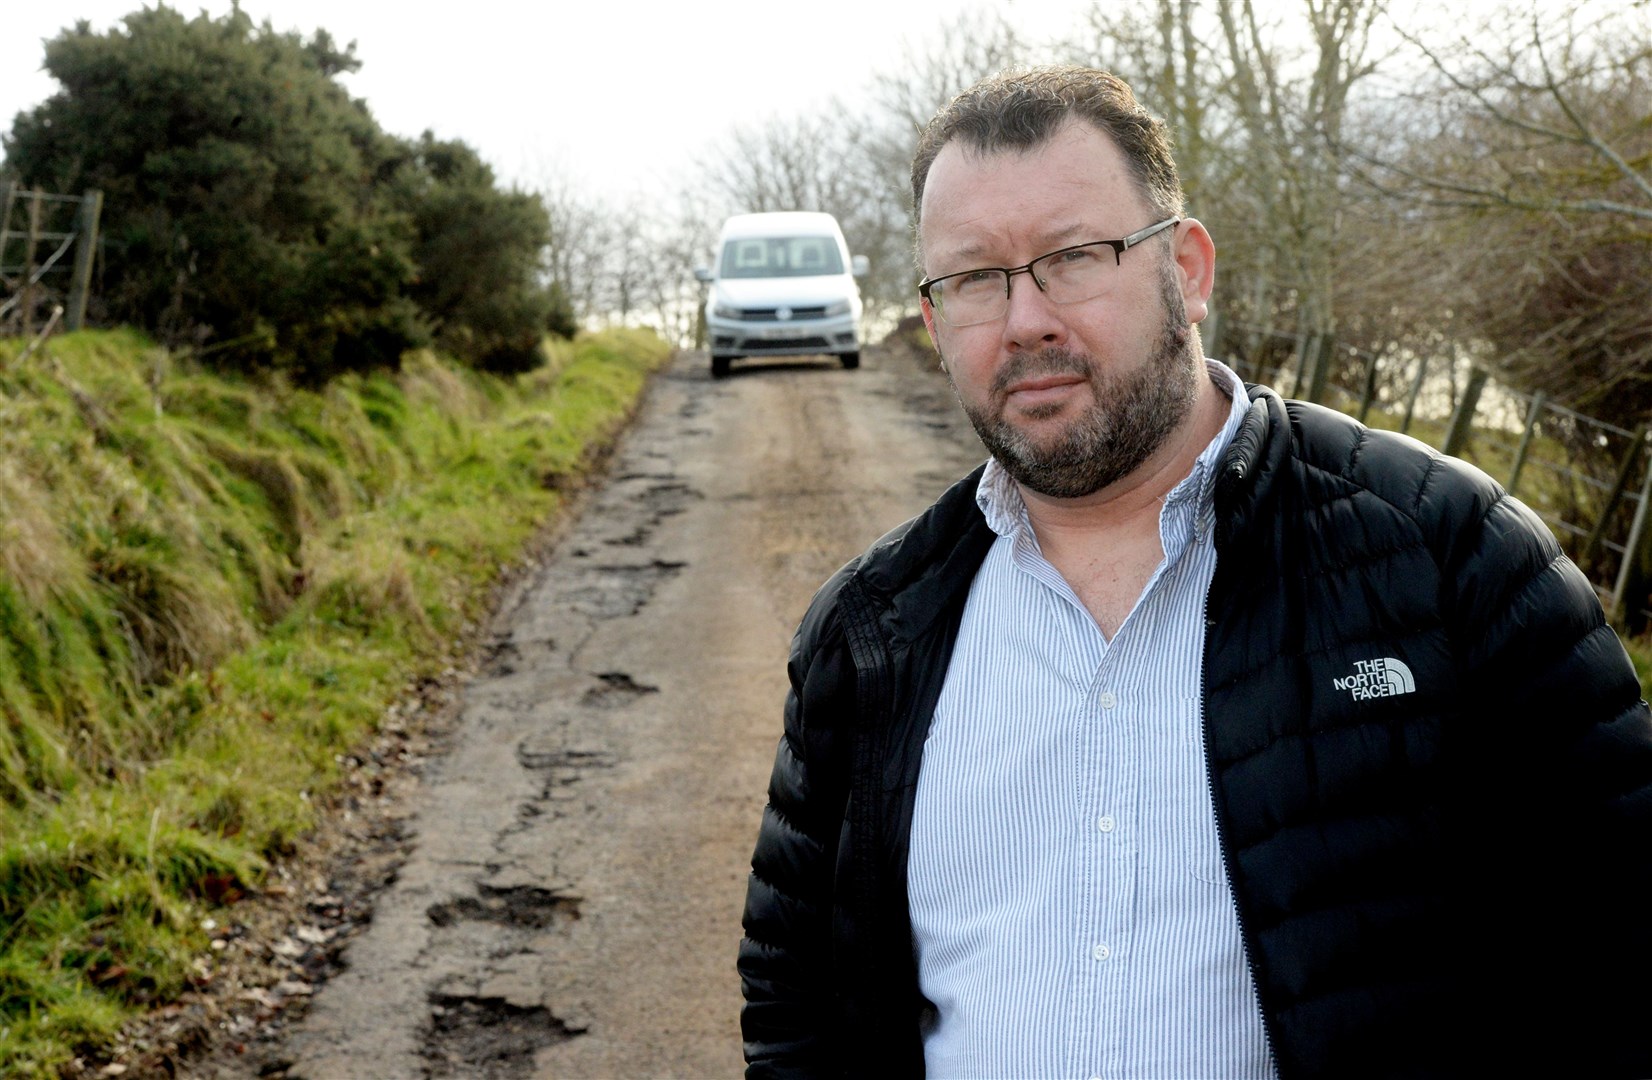 Stephen Skinner is worried potholes could reduce vital ambulance access needed for his daughter. Picture: James MacKenzie